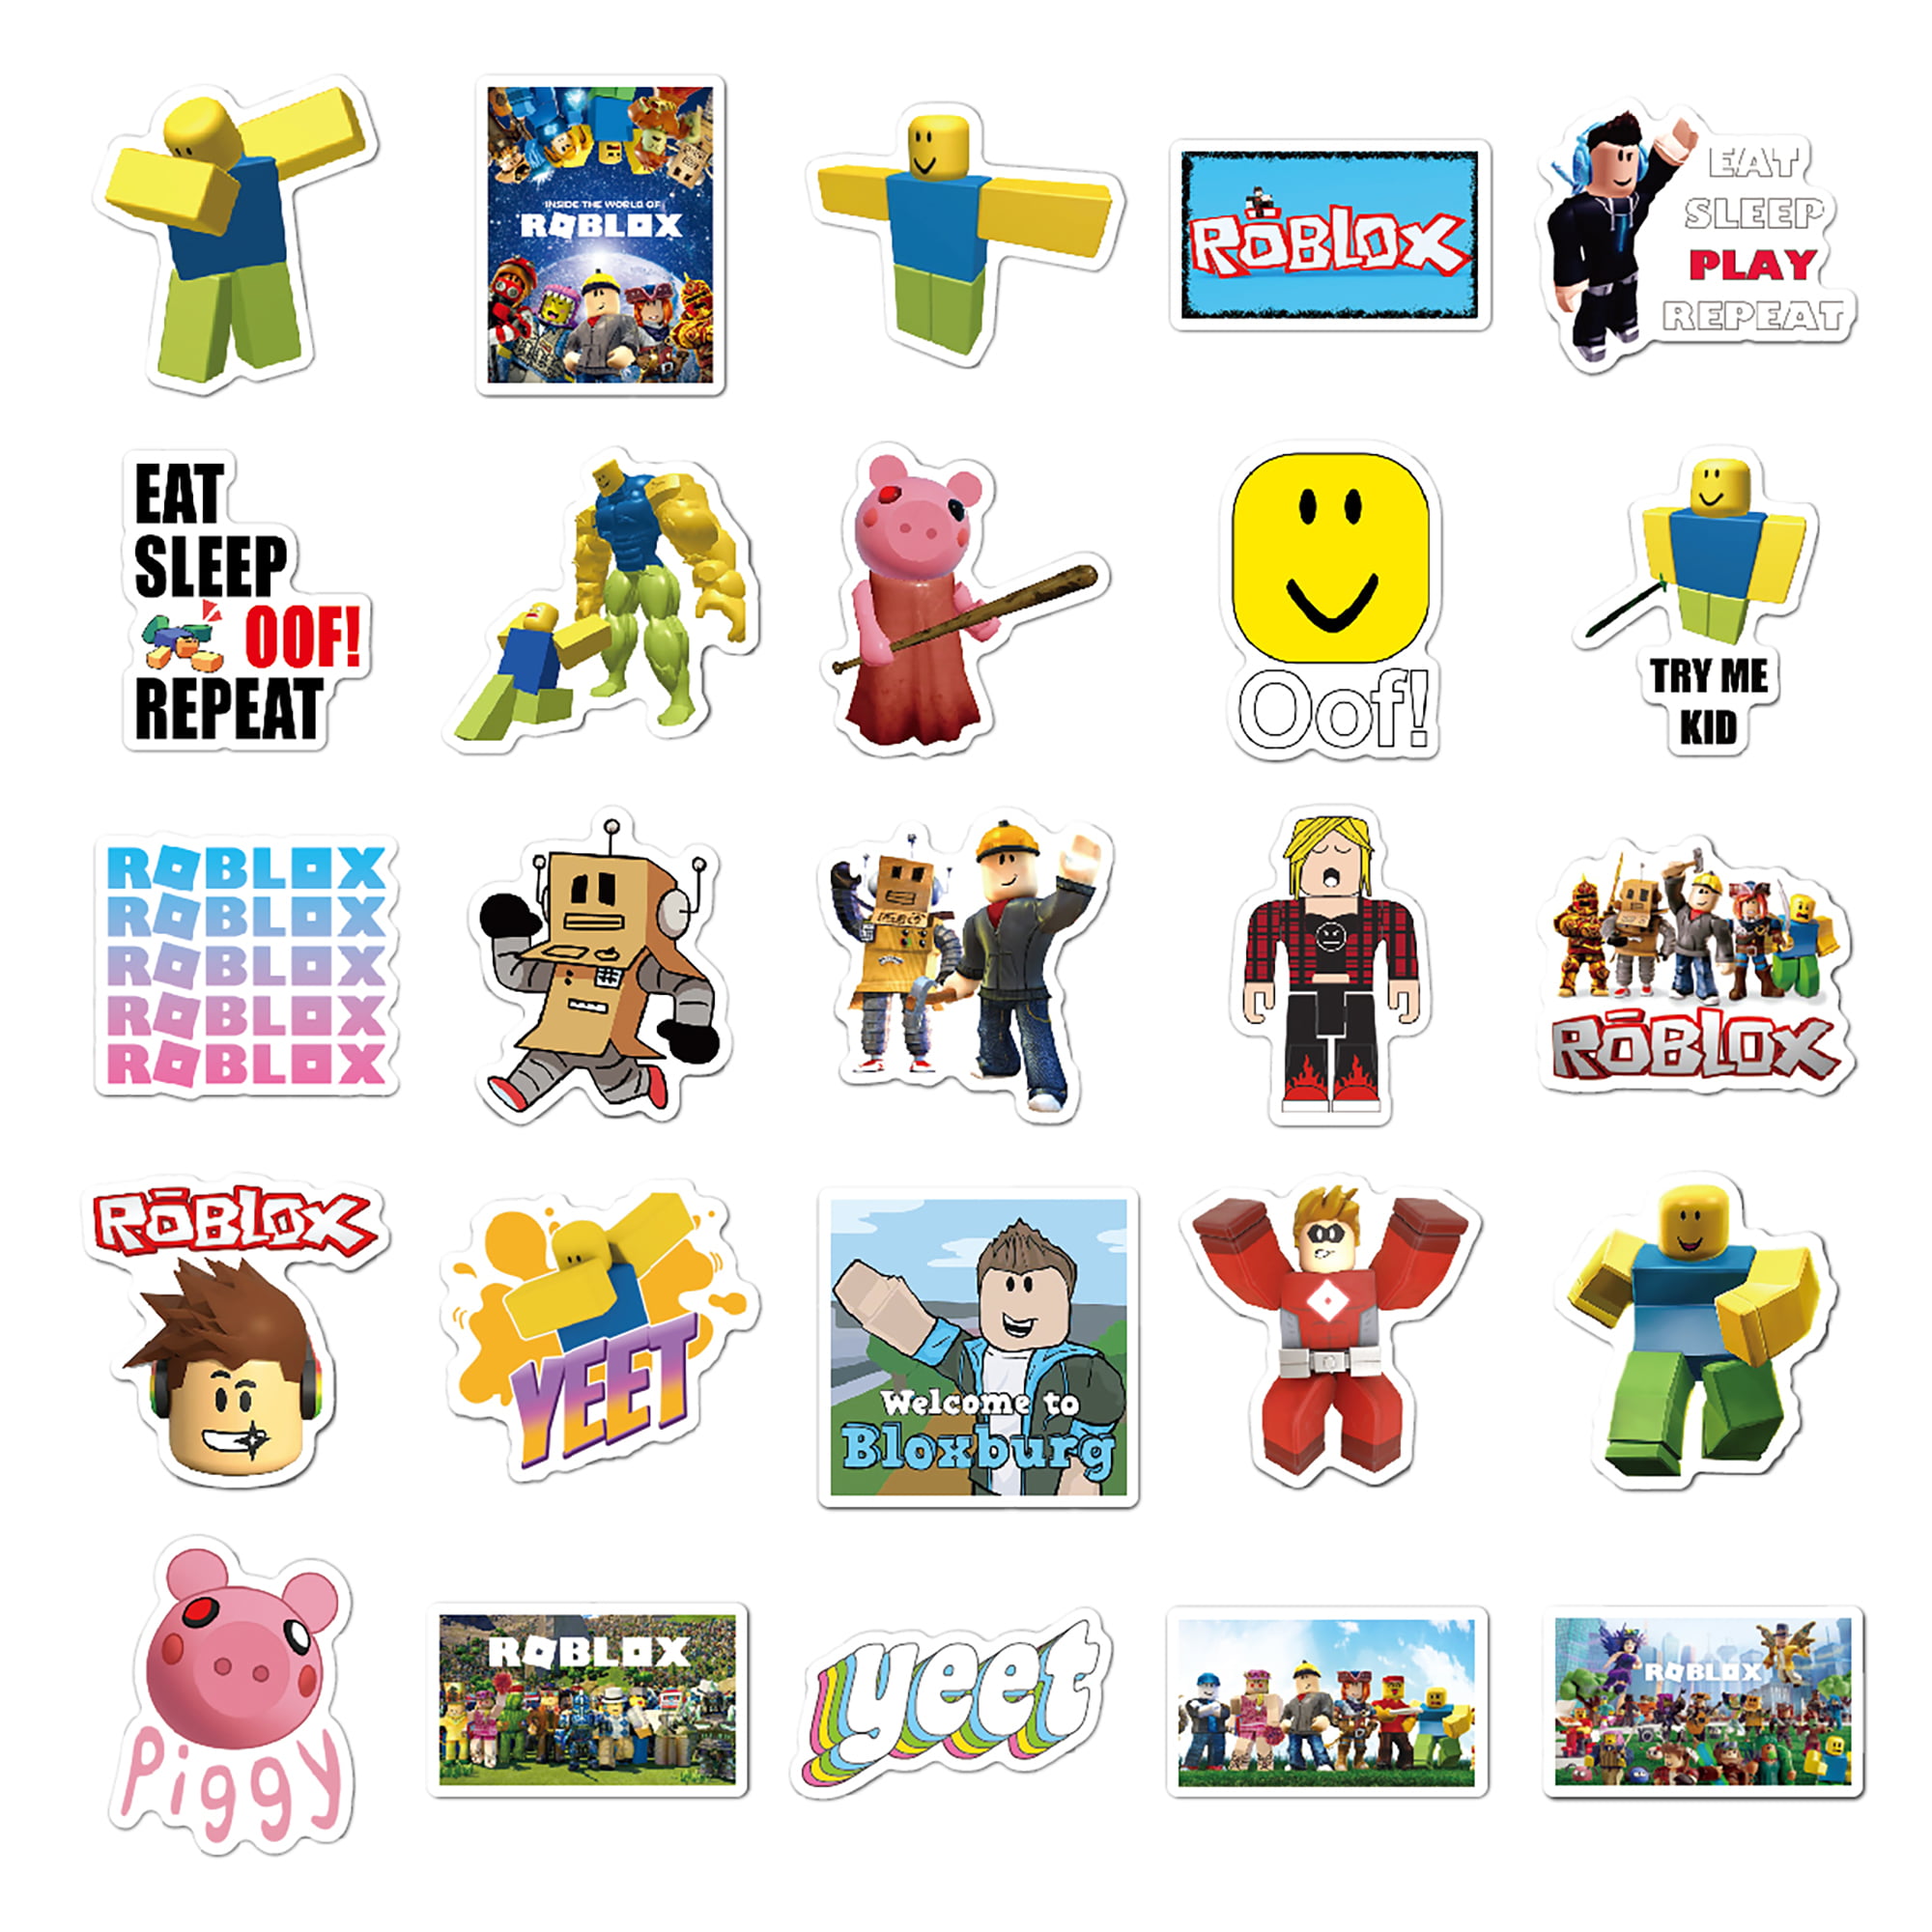 Roblox Sticker Pack 100pcs Sticker Decals Best Gift For Kids Children Teens Waterproof Online Gaming Stickers Pack For Home Decor Phone Hydro Flasks Water Bottle Bicycle Skateboard Laptop Pads Luggage Walmart Com Walmart Com - roblox beard decal